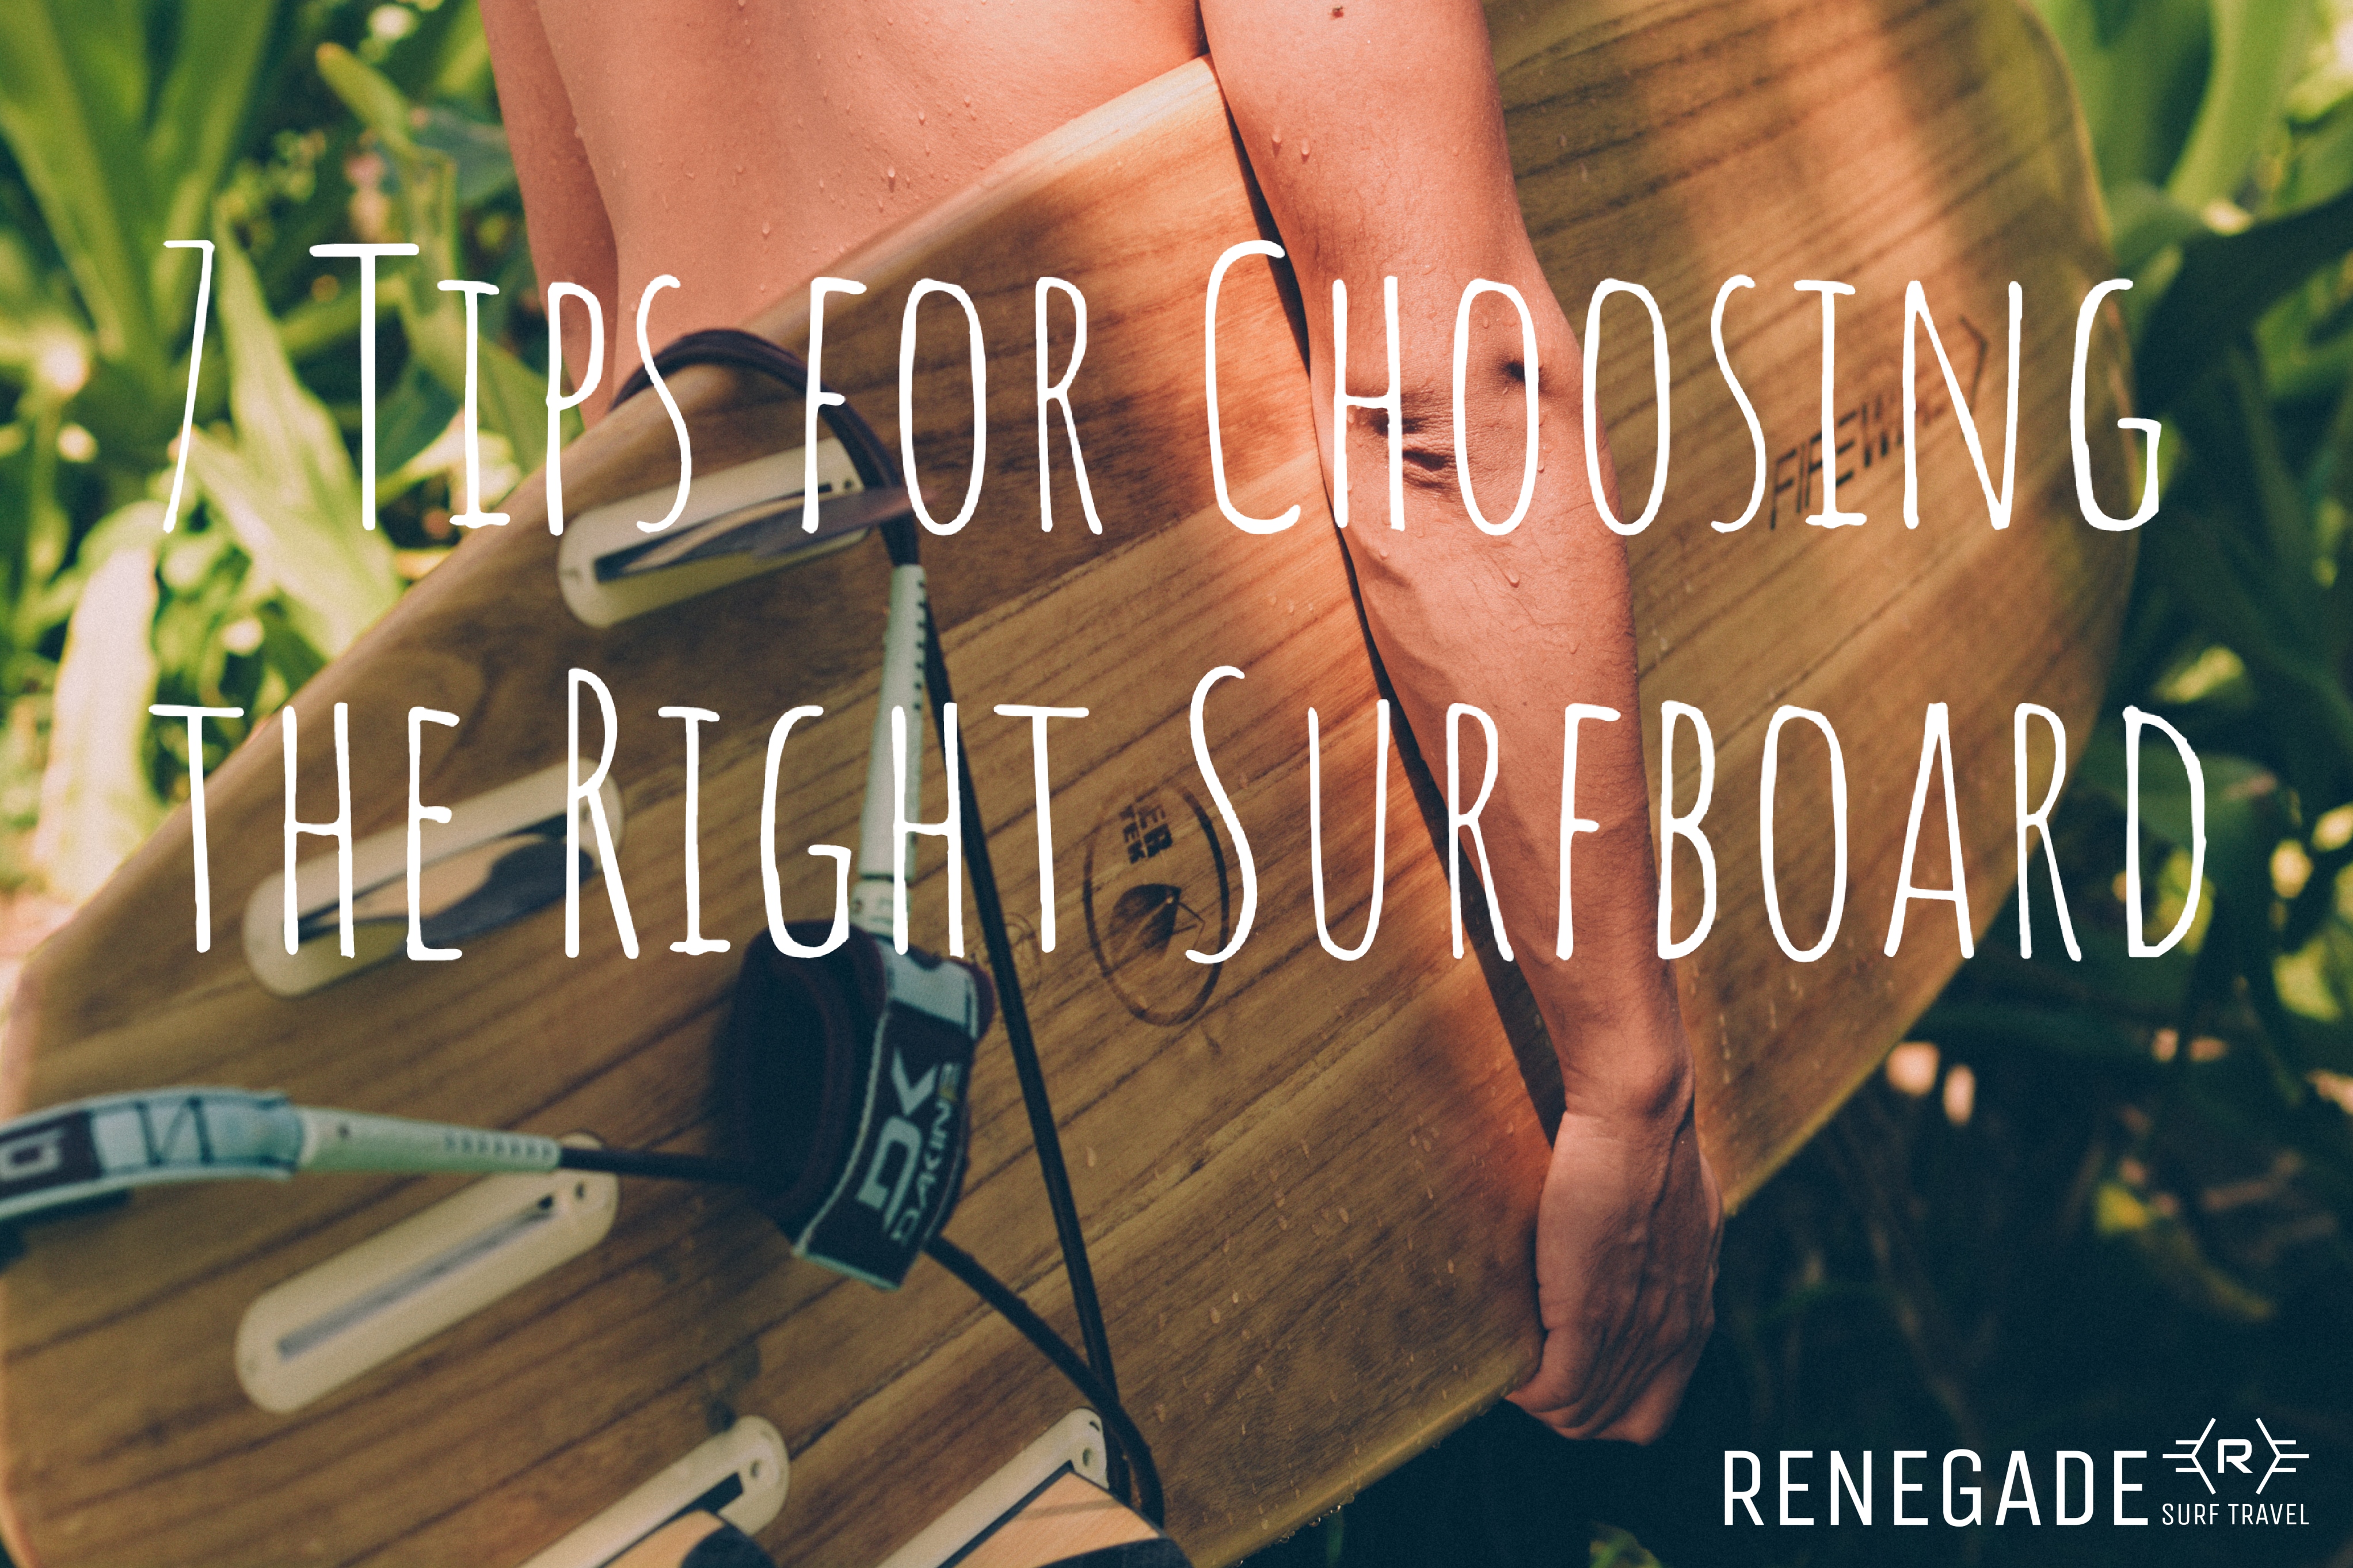 7 tips for choosing the right surfboard